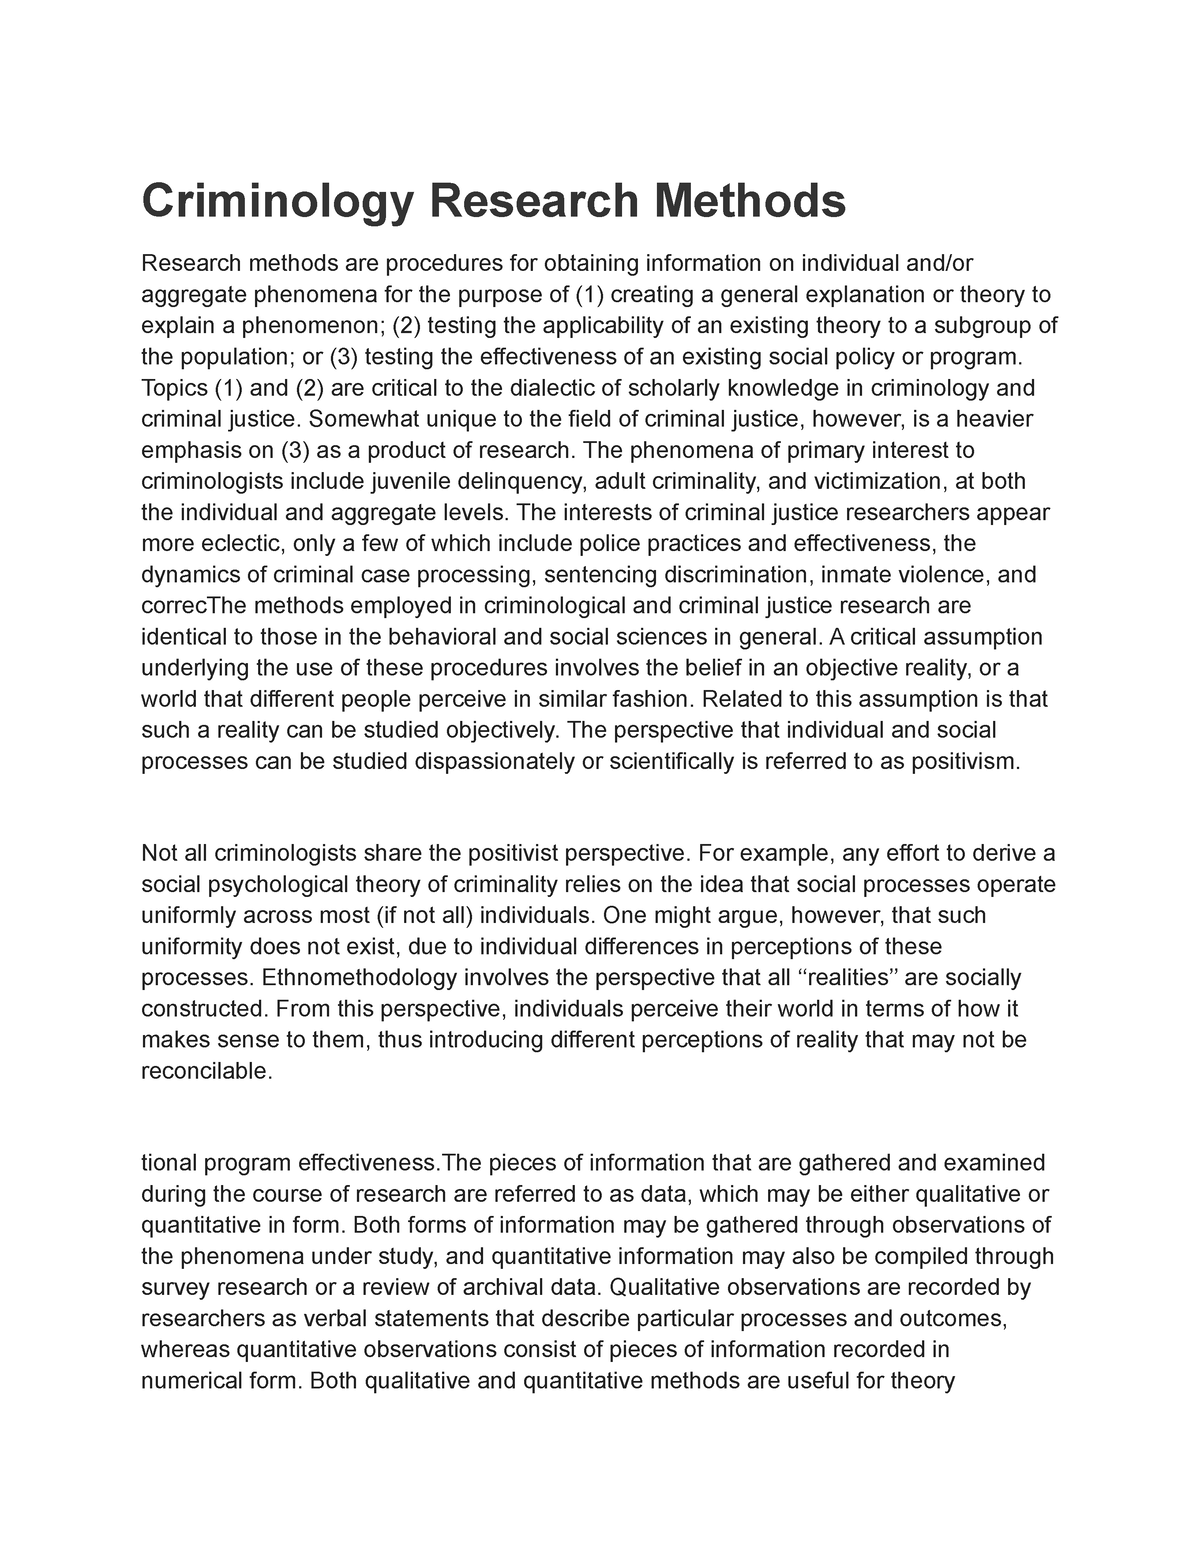 criminological research 2 thesis writing and presentation